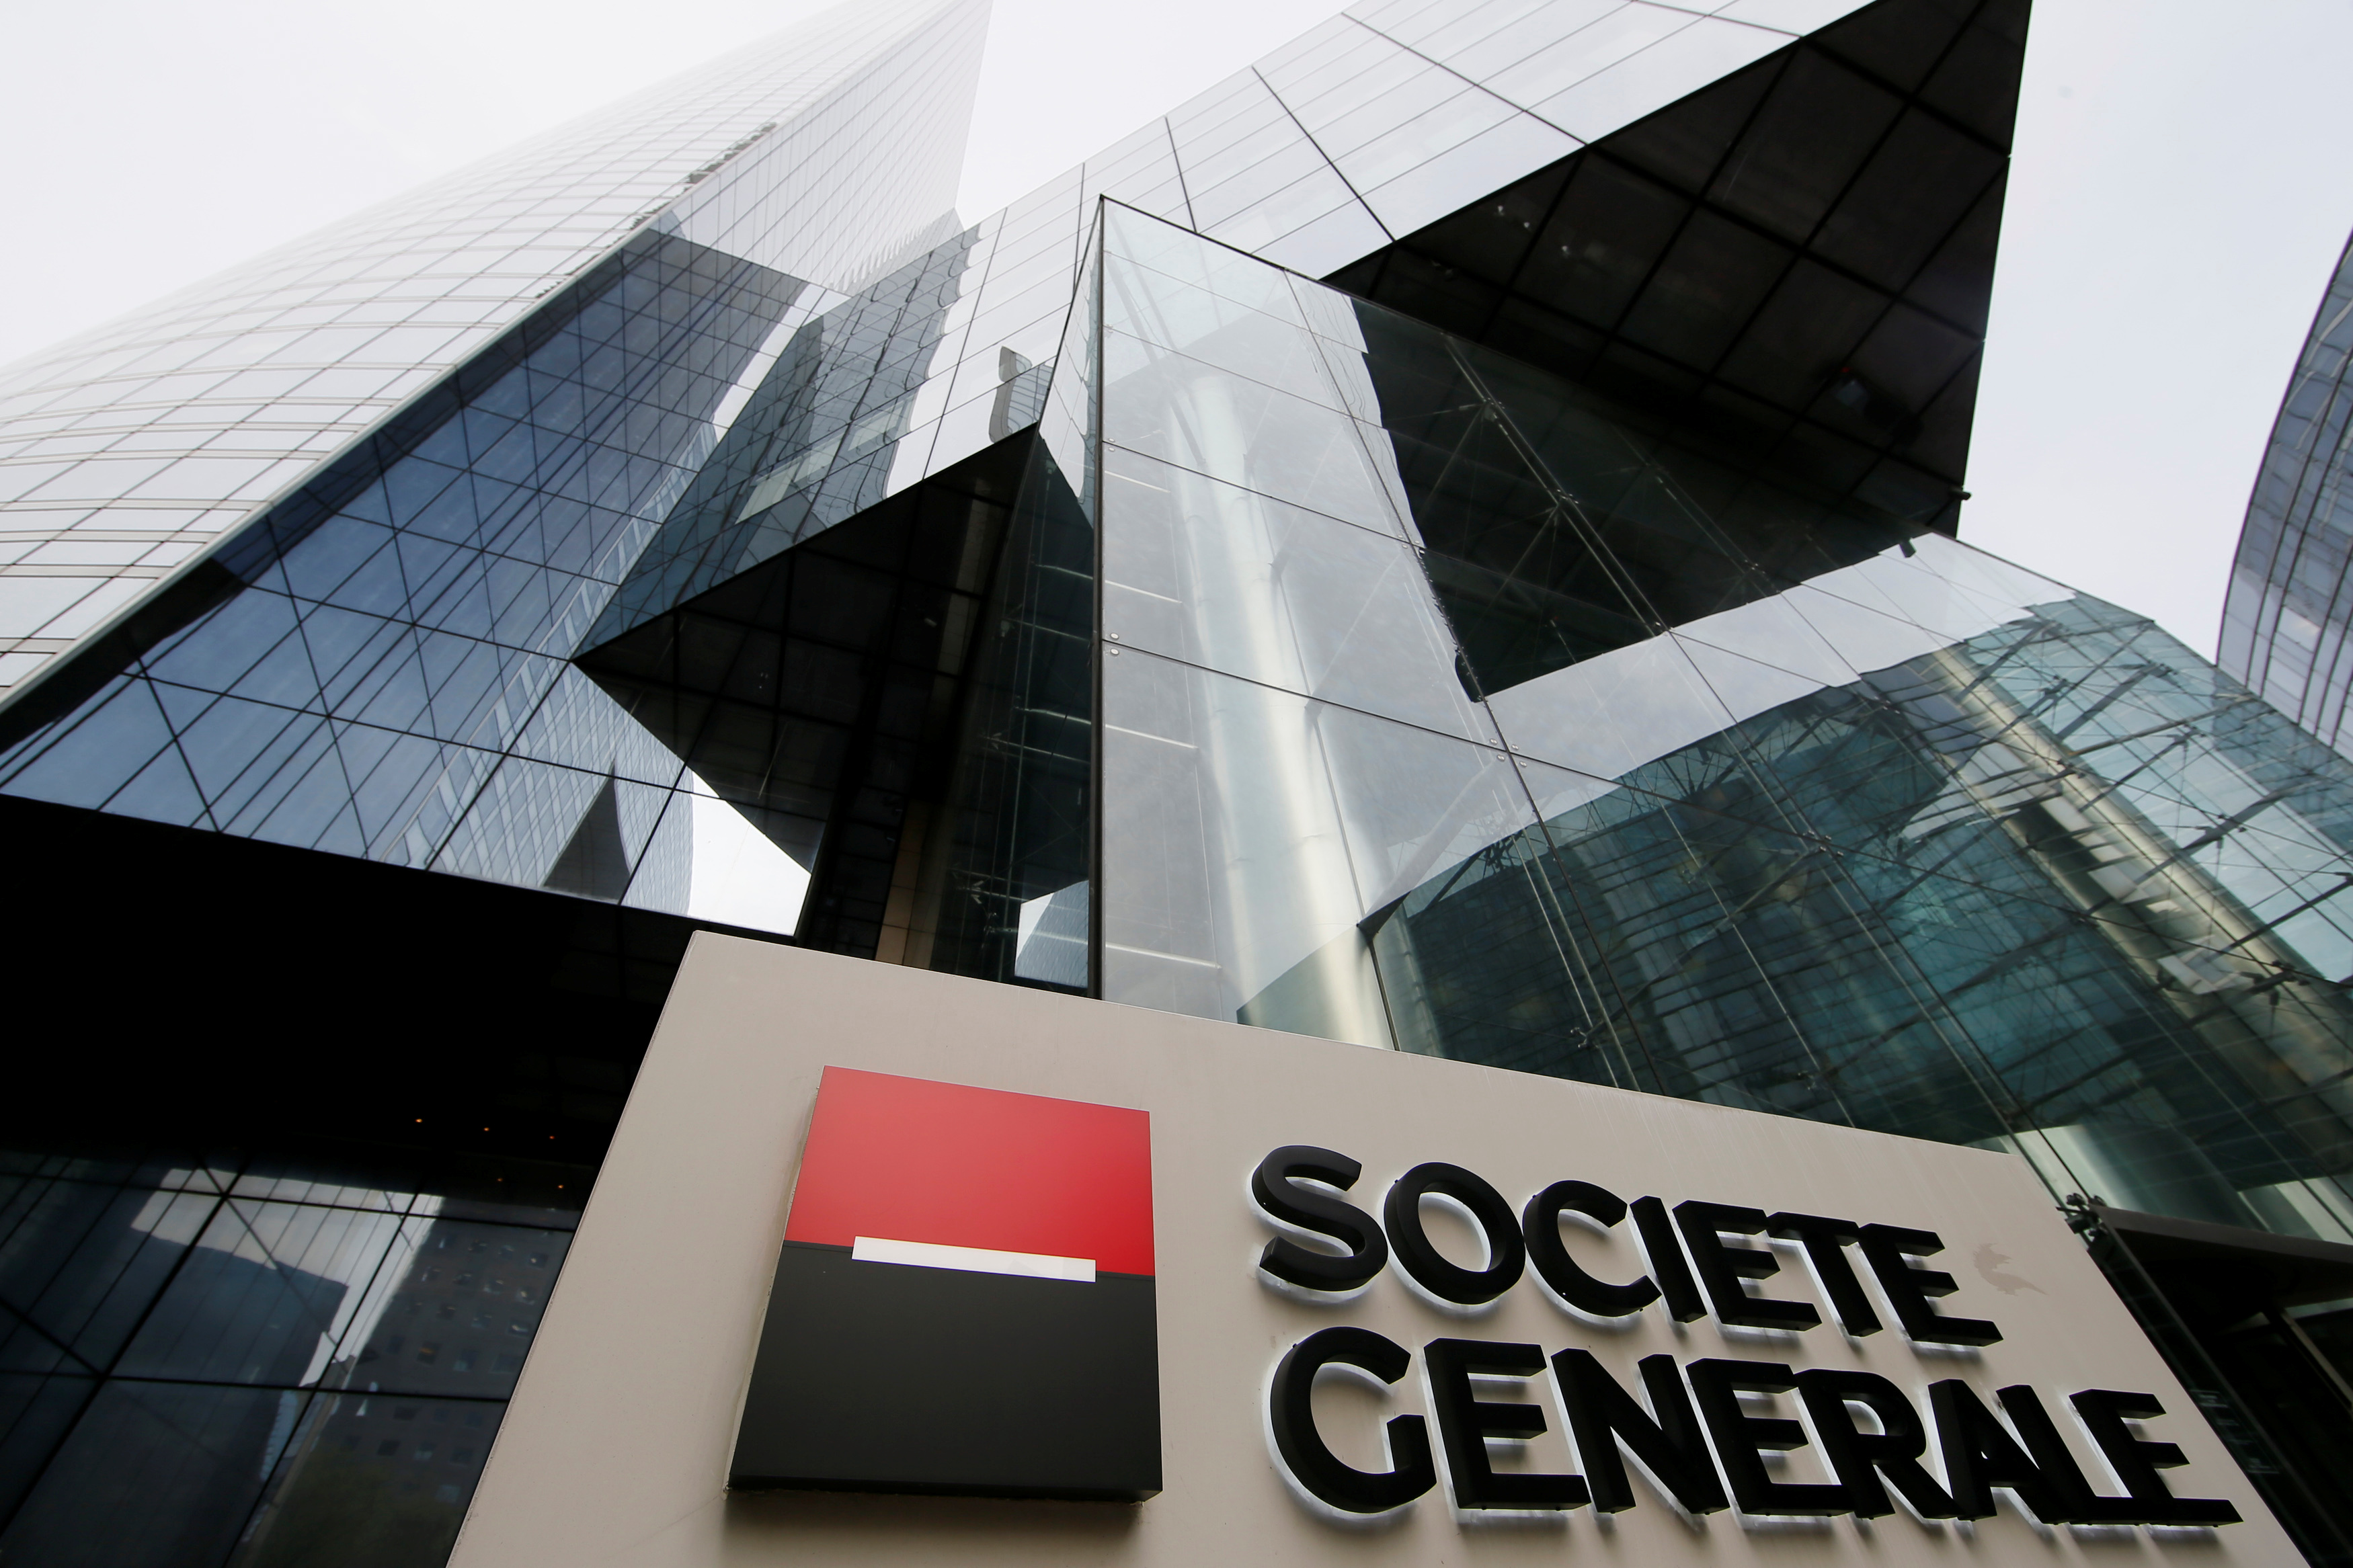 The logo of the French bank Societe Generale is seen in front of the bank's headquarters building at La Defense business and financial district in Courbevoie near Paris